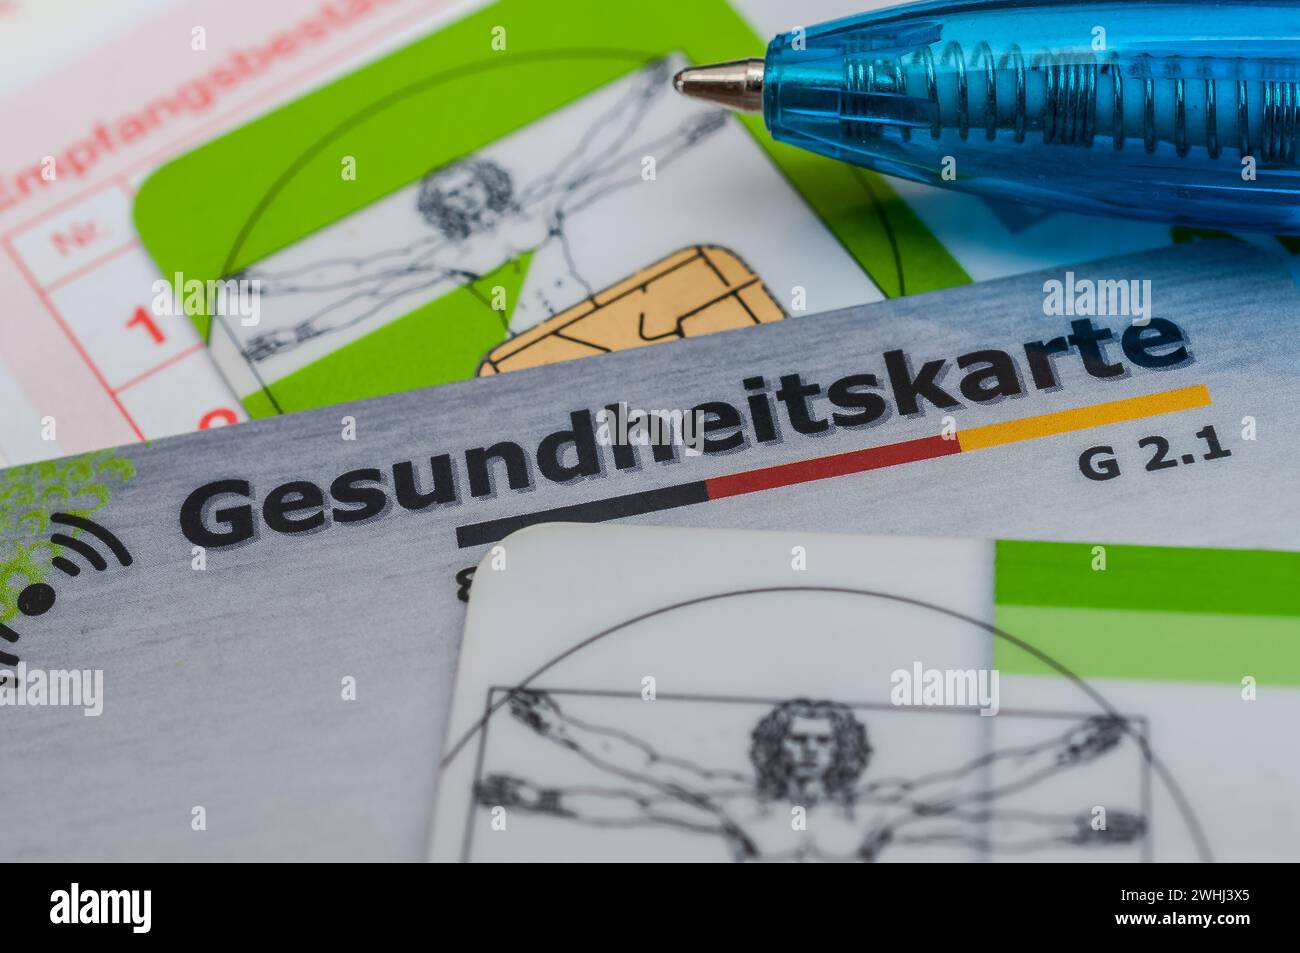 Health card of the health insurance funds in Germany G2.1 Stock Photo